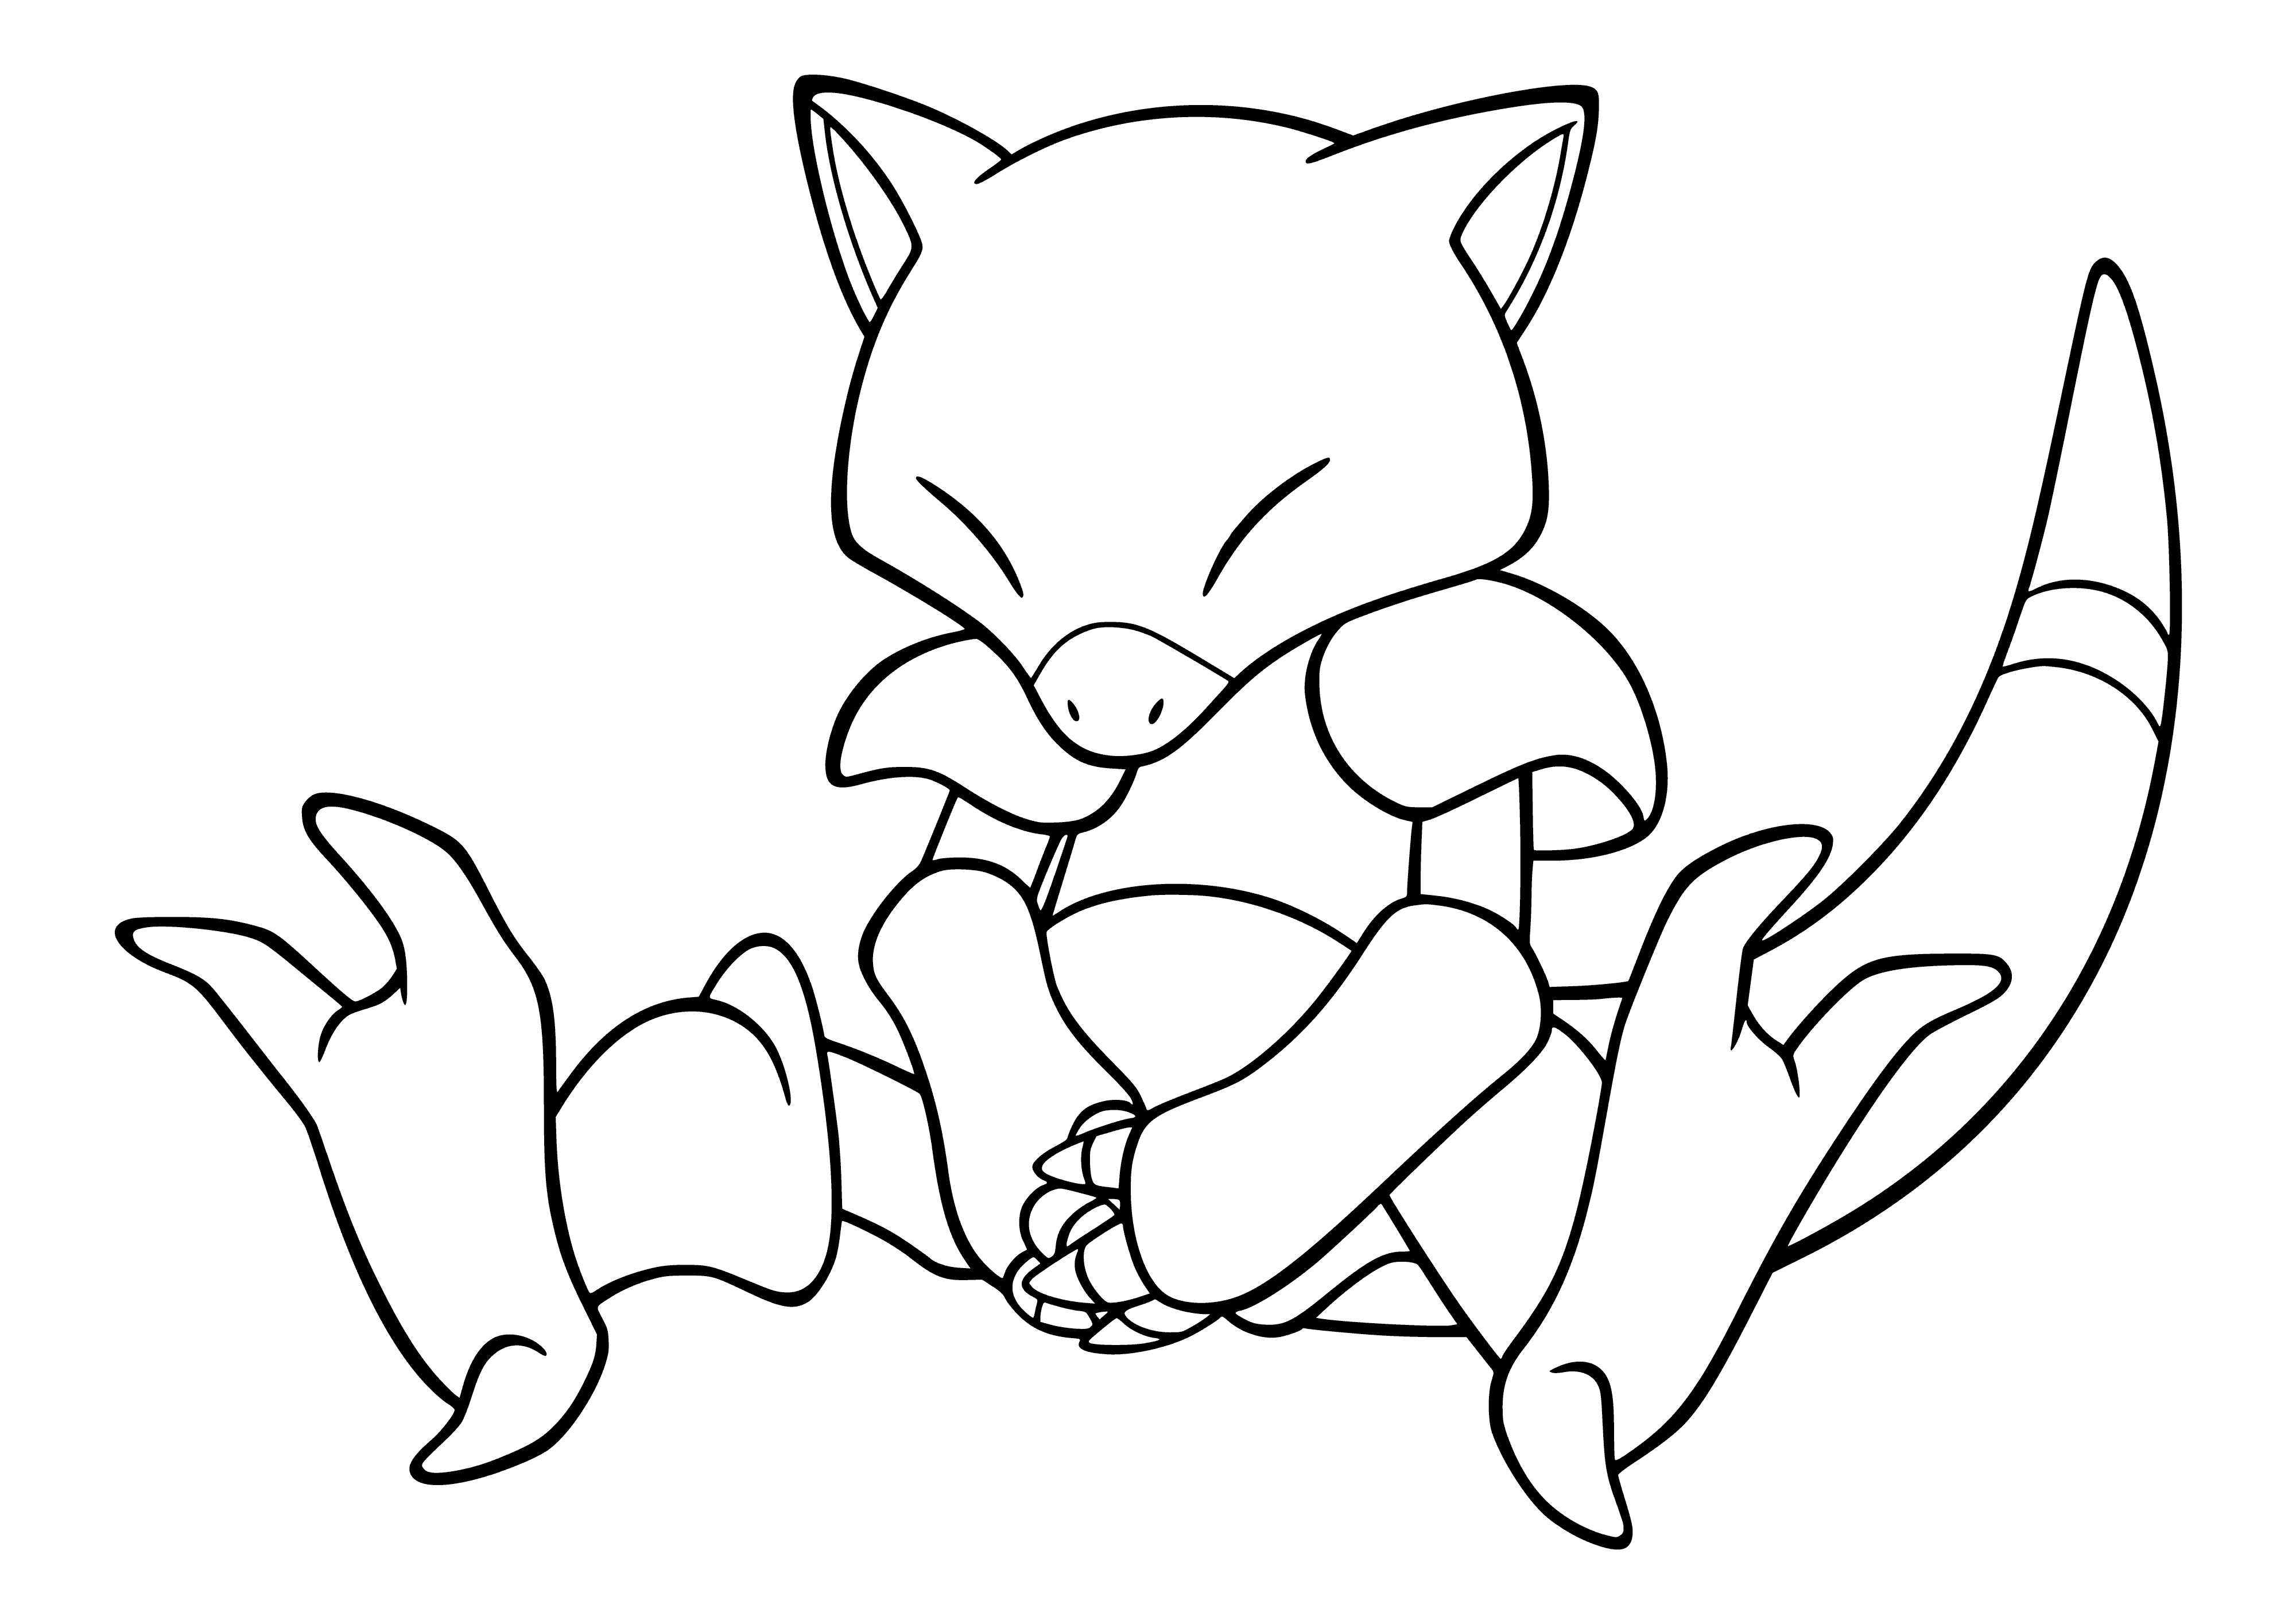 coloring page: Small, brown Pokémon w/long tail, large eyes & pointy ears sleeping.